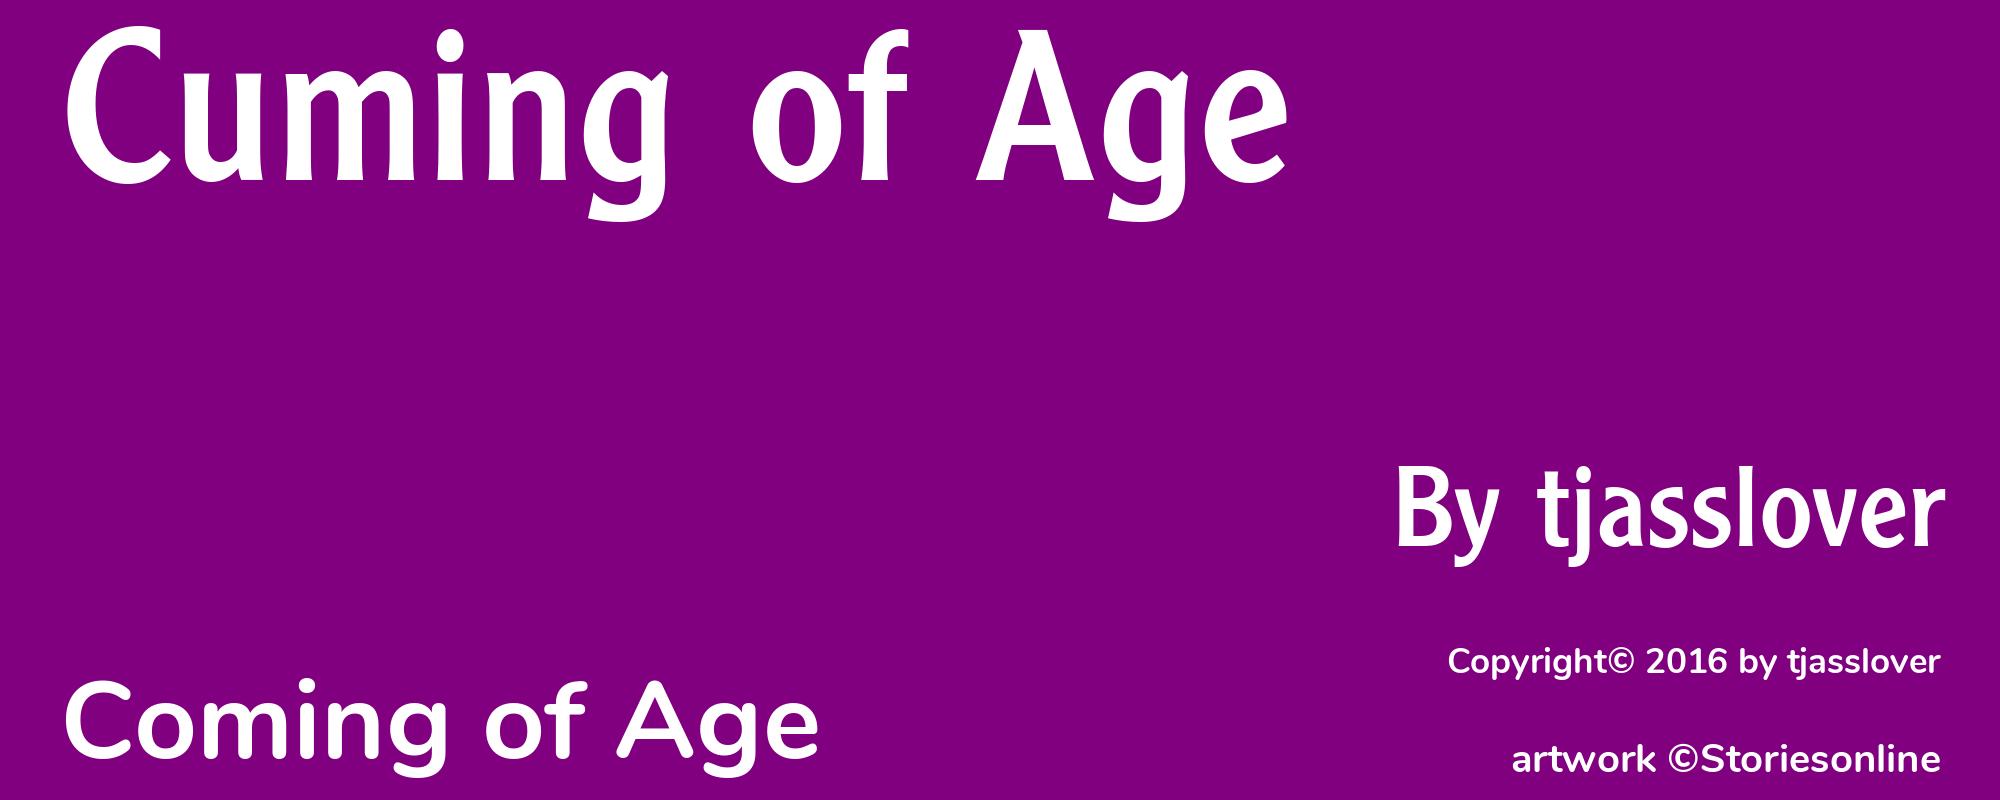 Cuming of Age - Cover